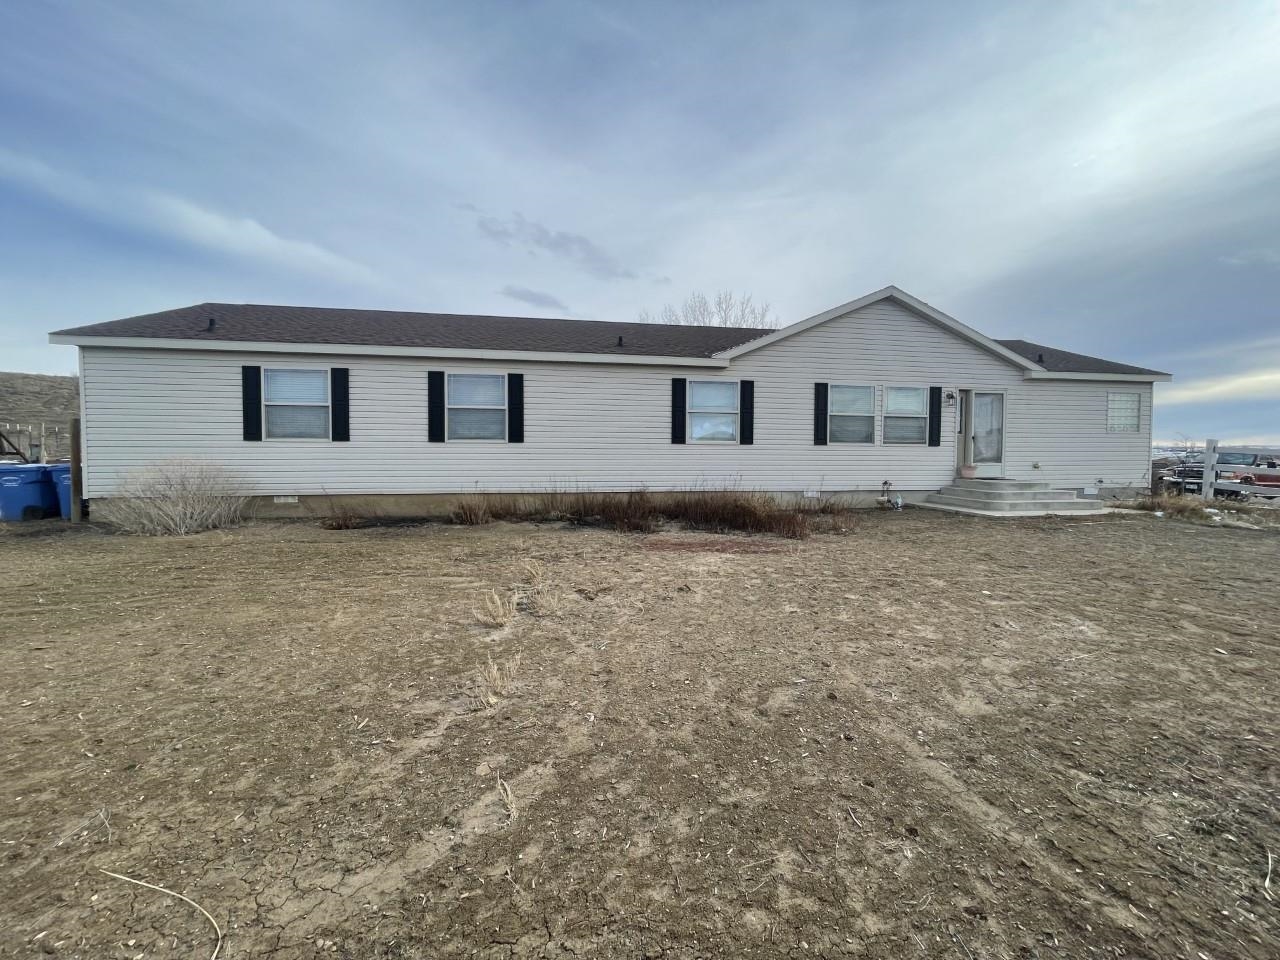 3 bedrooms 3 full bathrooms with a 12x10 office and a sitting room off of the master bedroom, 4.9 acres engineered foundation and septic with french drain and views galore. Bring your horses, side by sides, RV, boats, etc. Room for all the toys. Nothing will be built behind property.